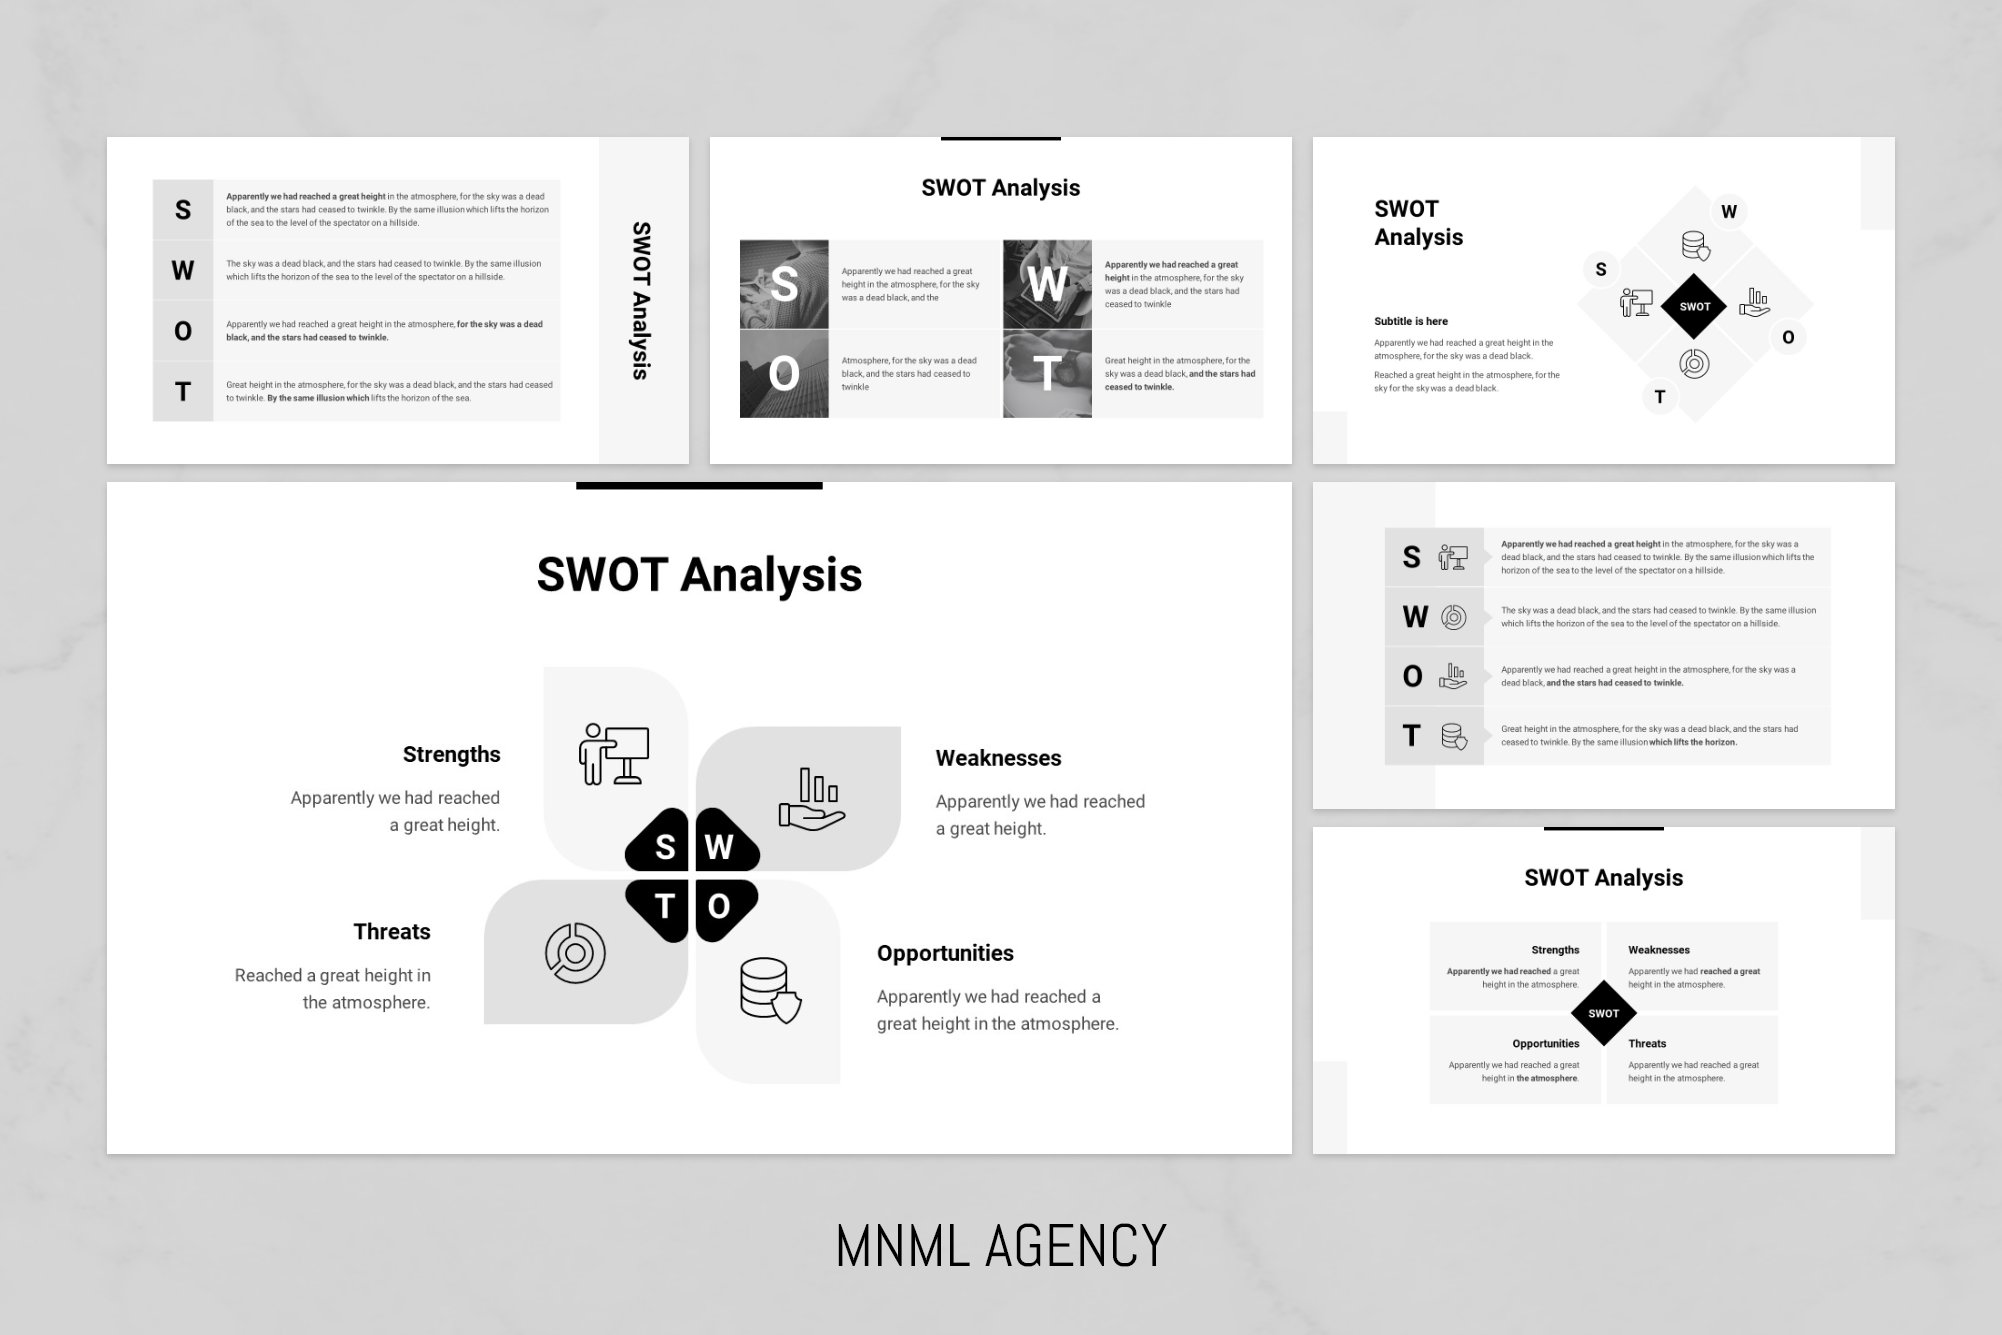 All details with swot analysis elements.